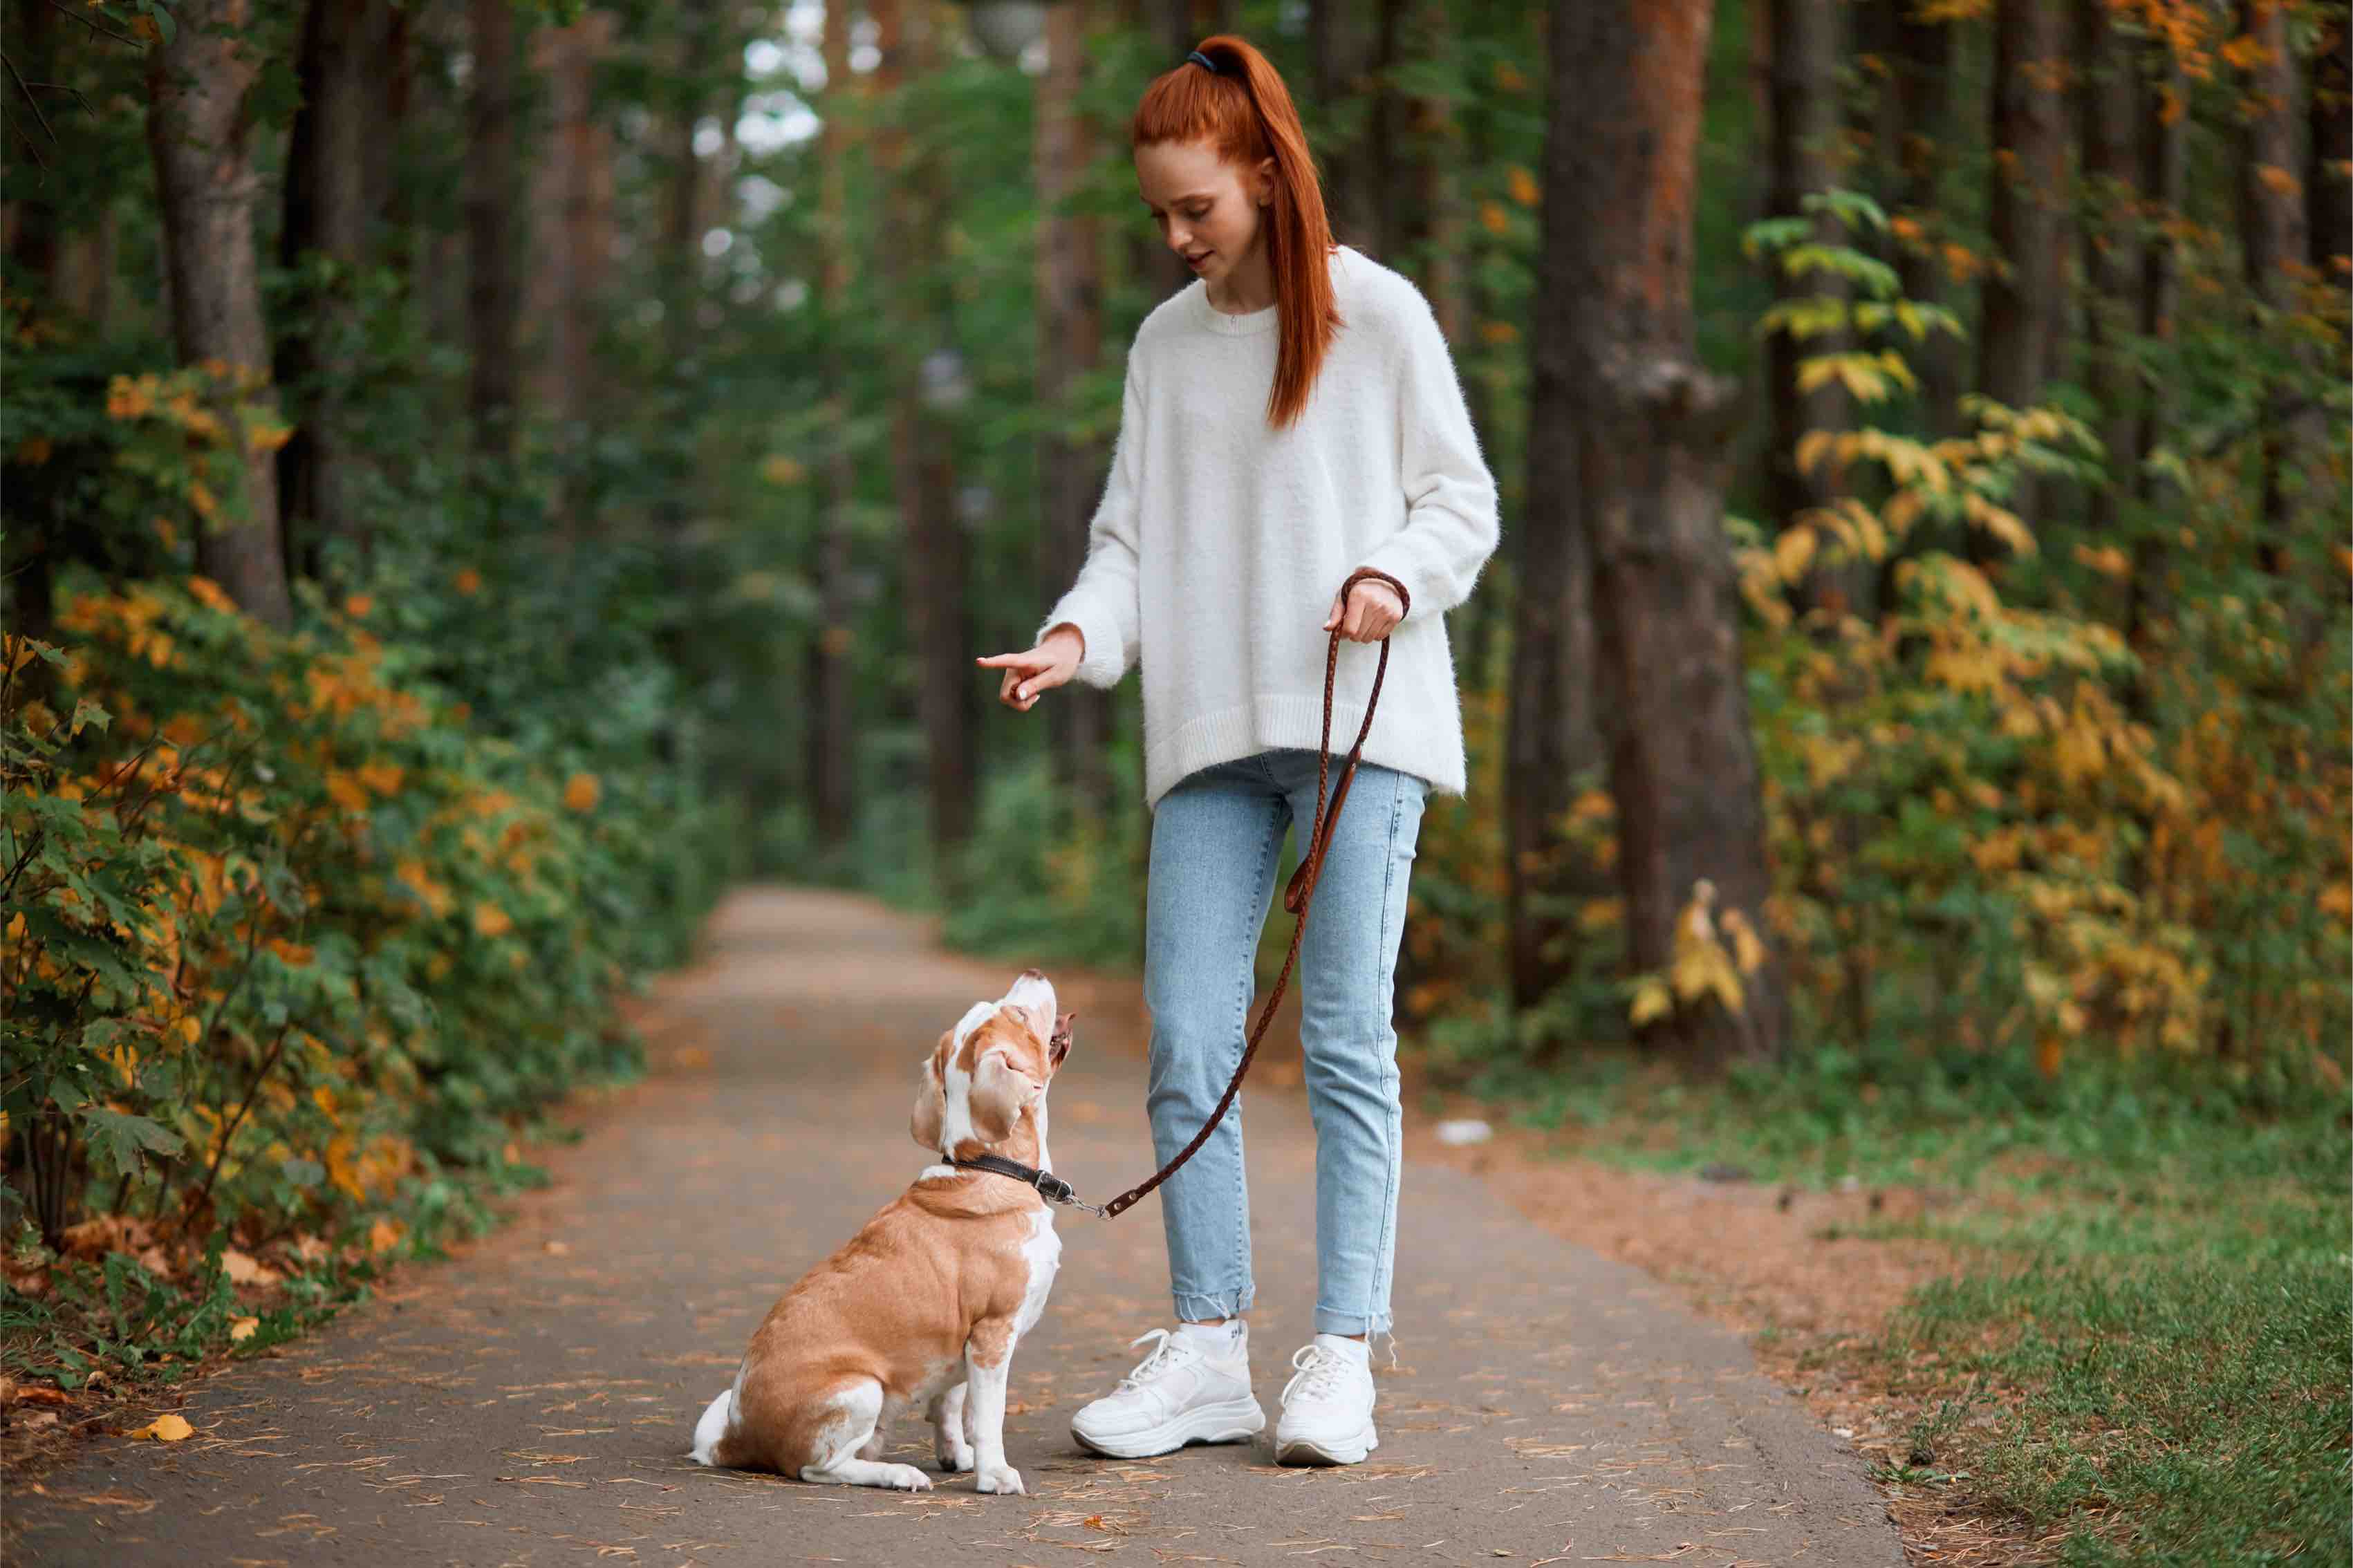 Girl and dog working on their Dog Training Elite training on a walk in the park.